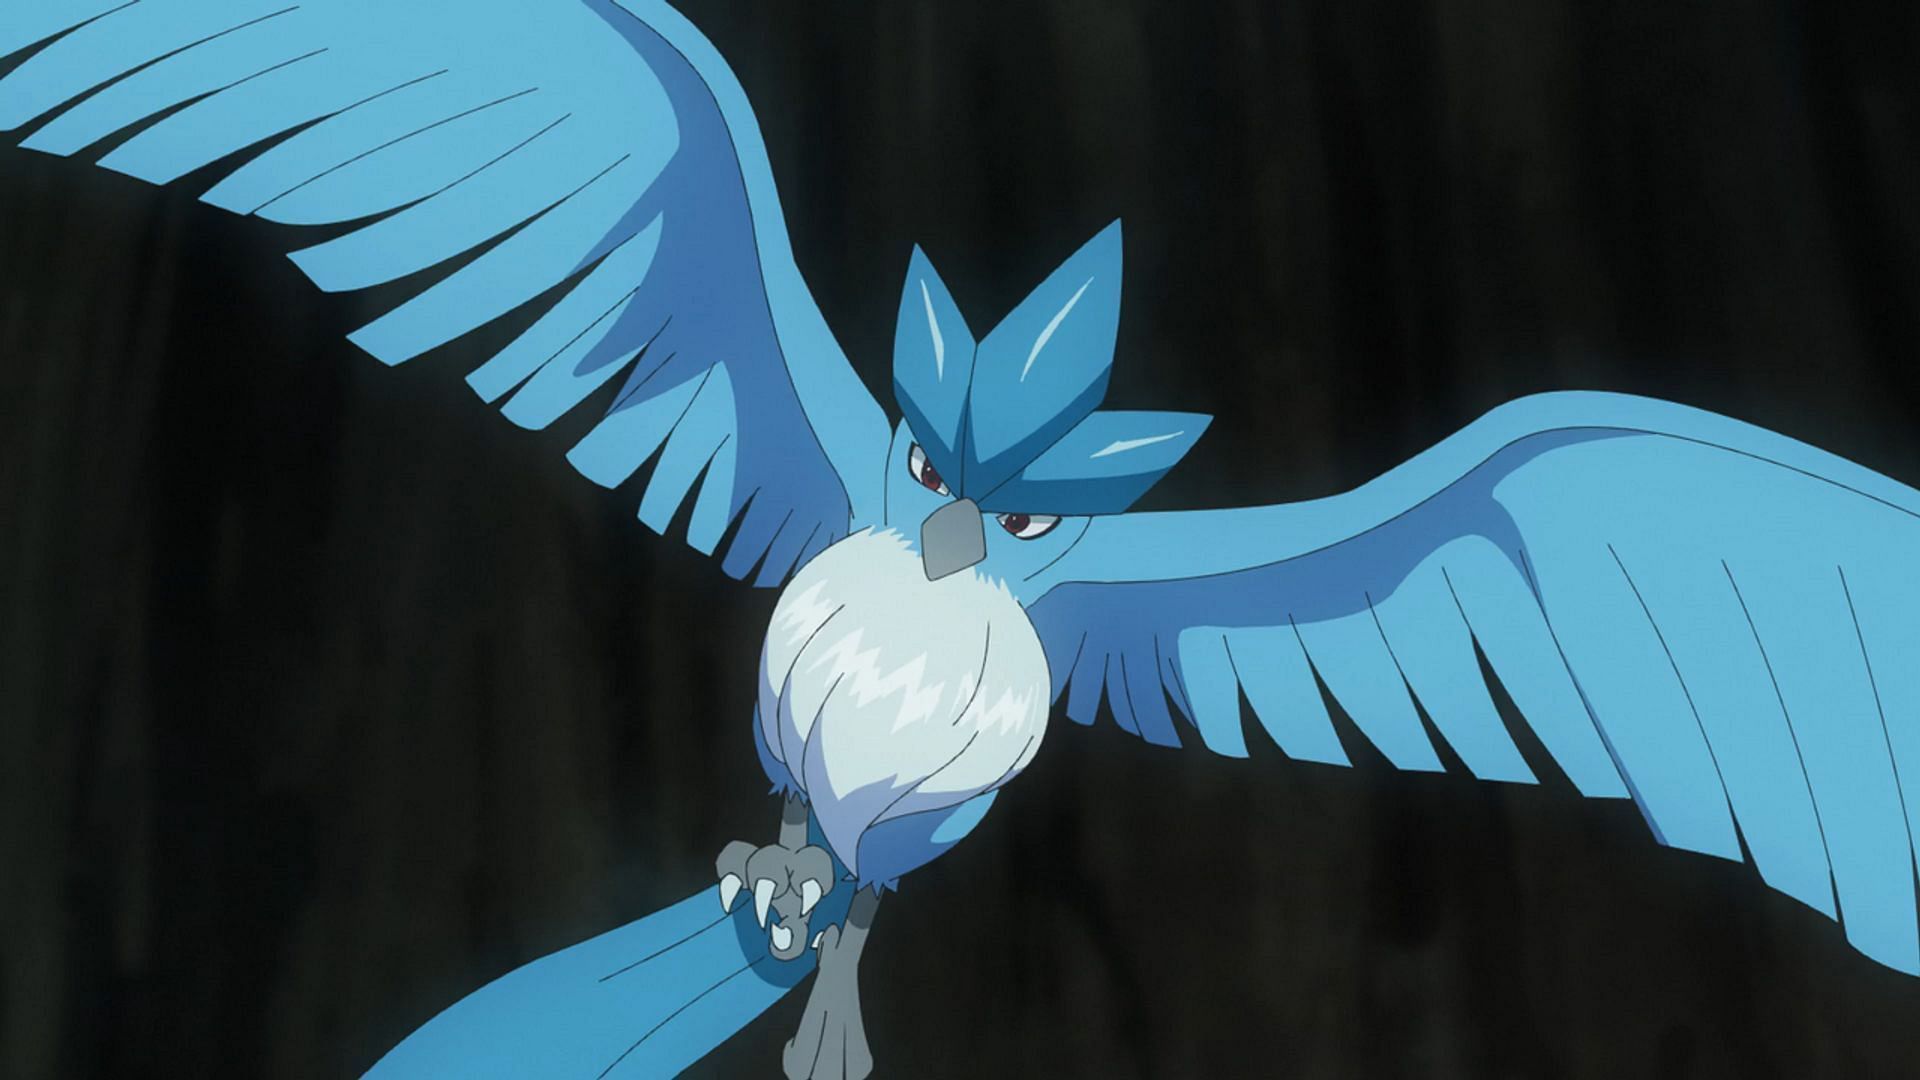 Pokémon Go Articuno counters, weaknesses and moveset explained